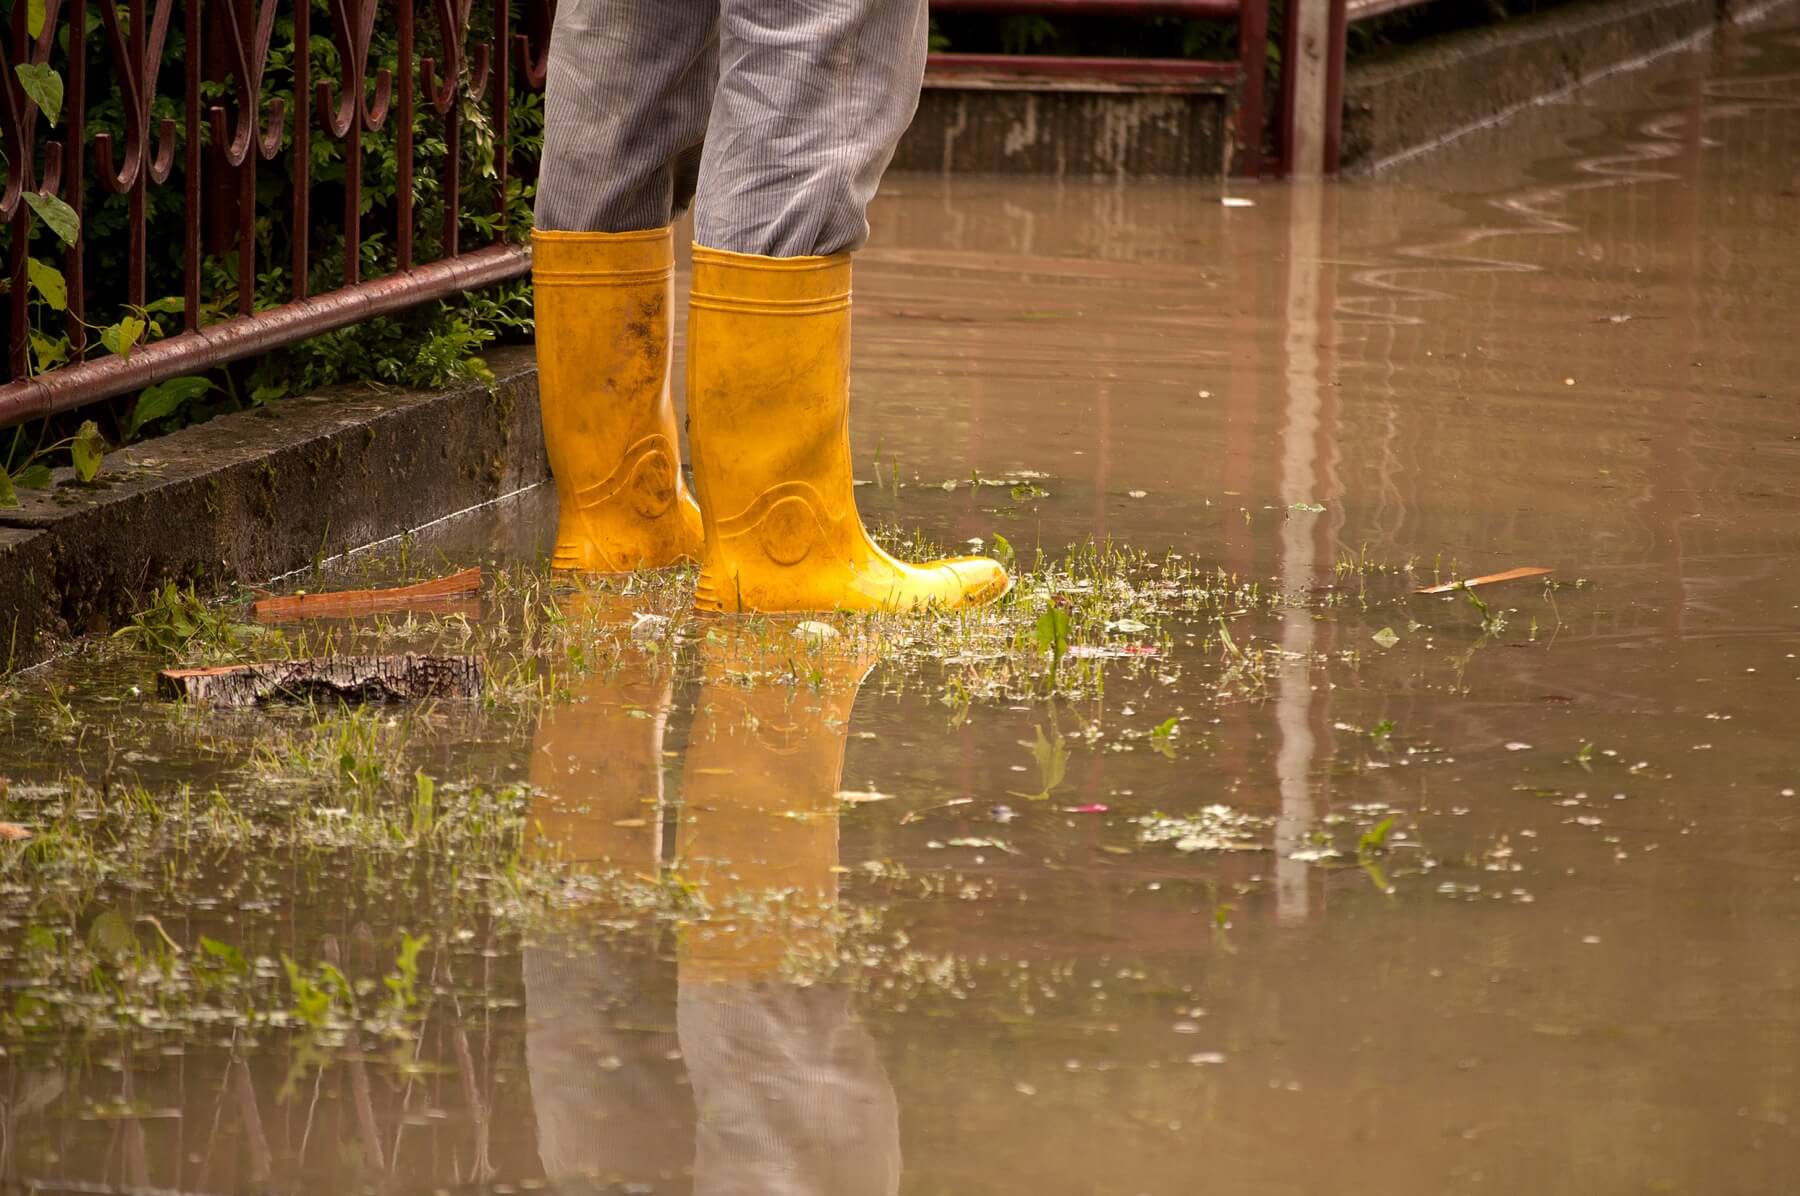 Flooded Yard - Man Standing In It